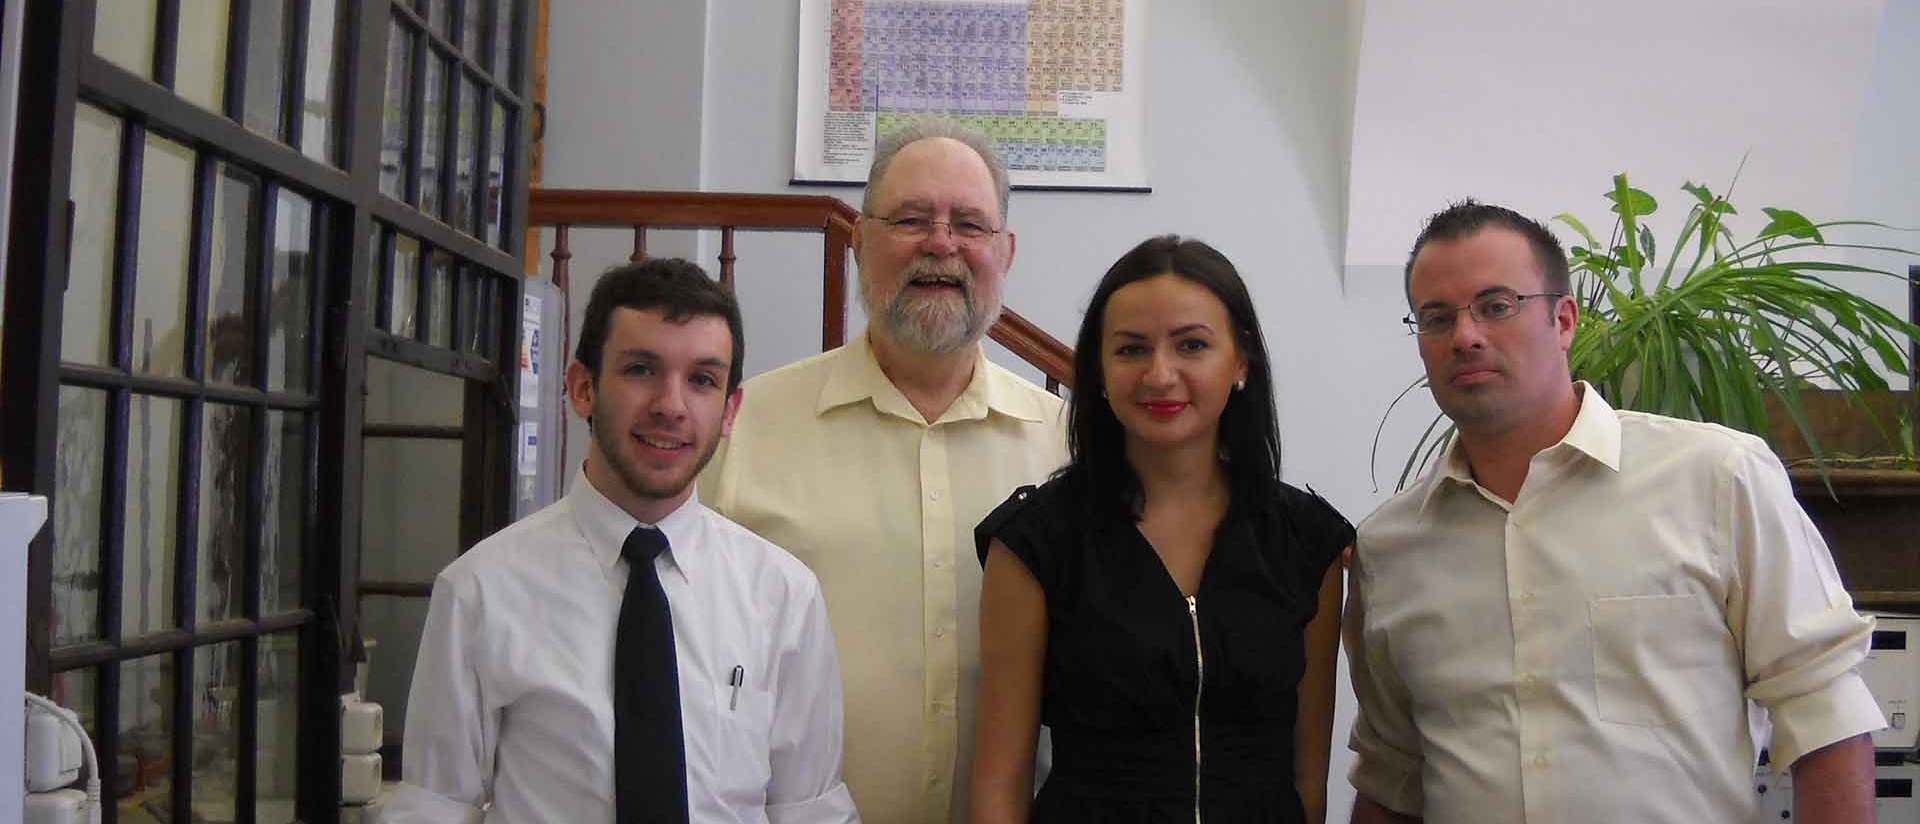 David Lewis and students at Kazan Federal University in Russia